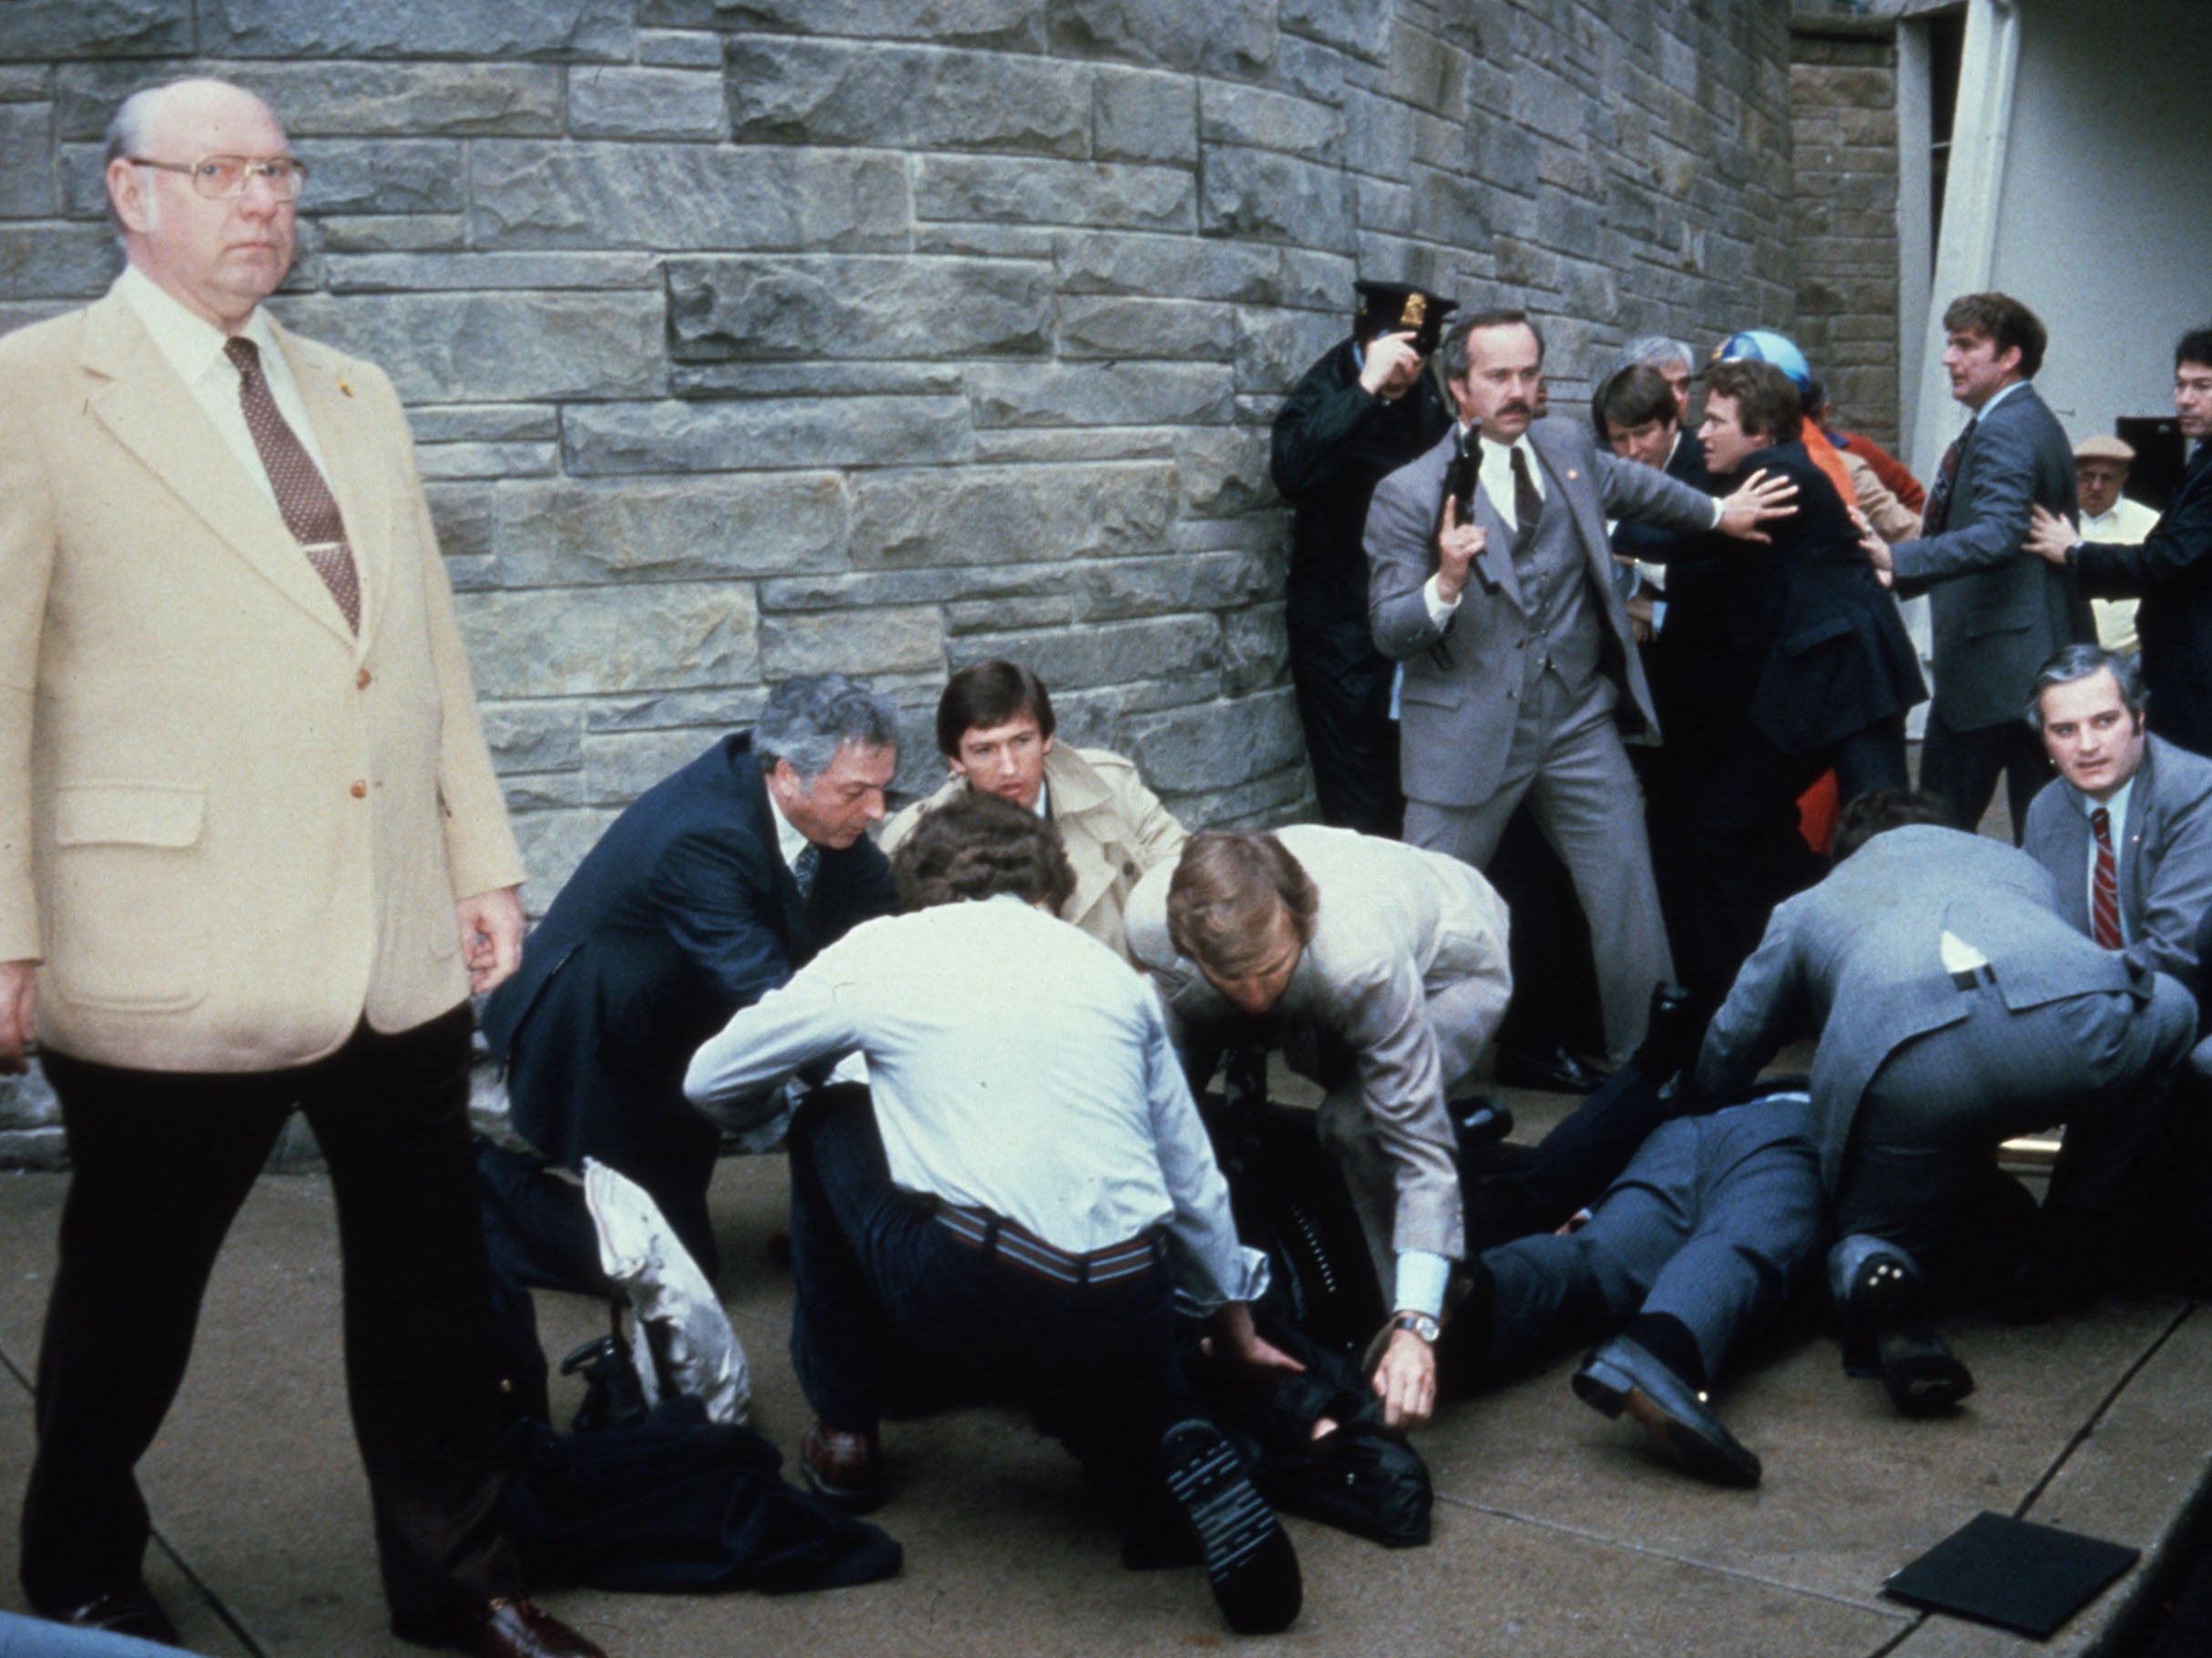 John Hinckley Jr is held down by police after attempting to kill Ronald Reagan, while shooting victims James Brady and Timothy McCarthy are tended to